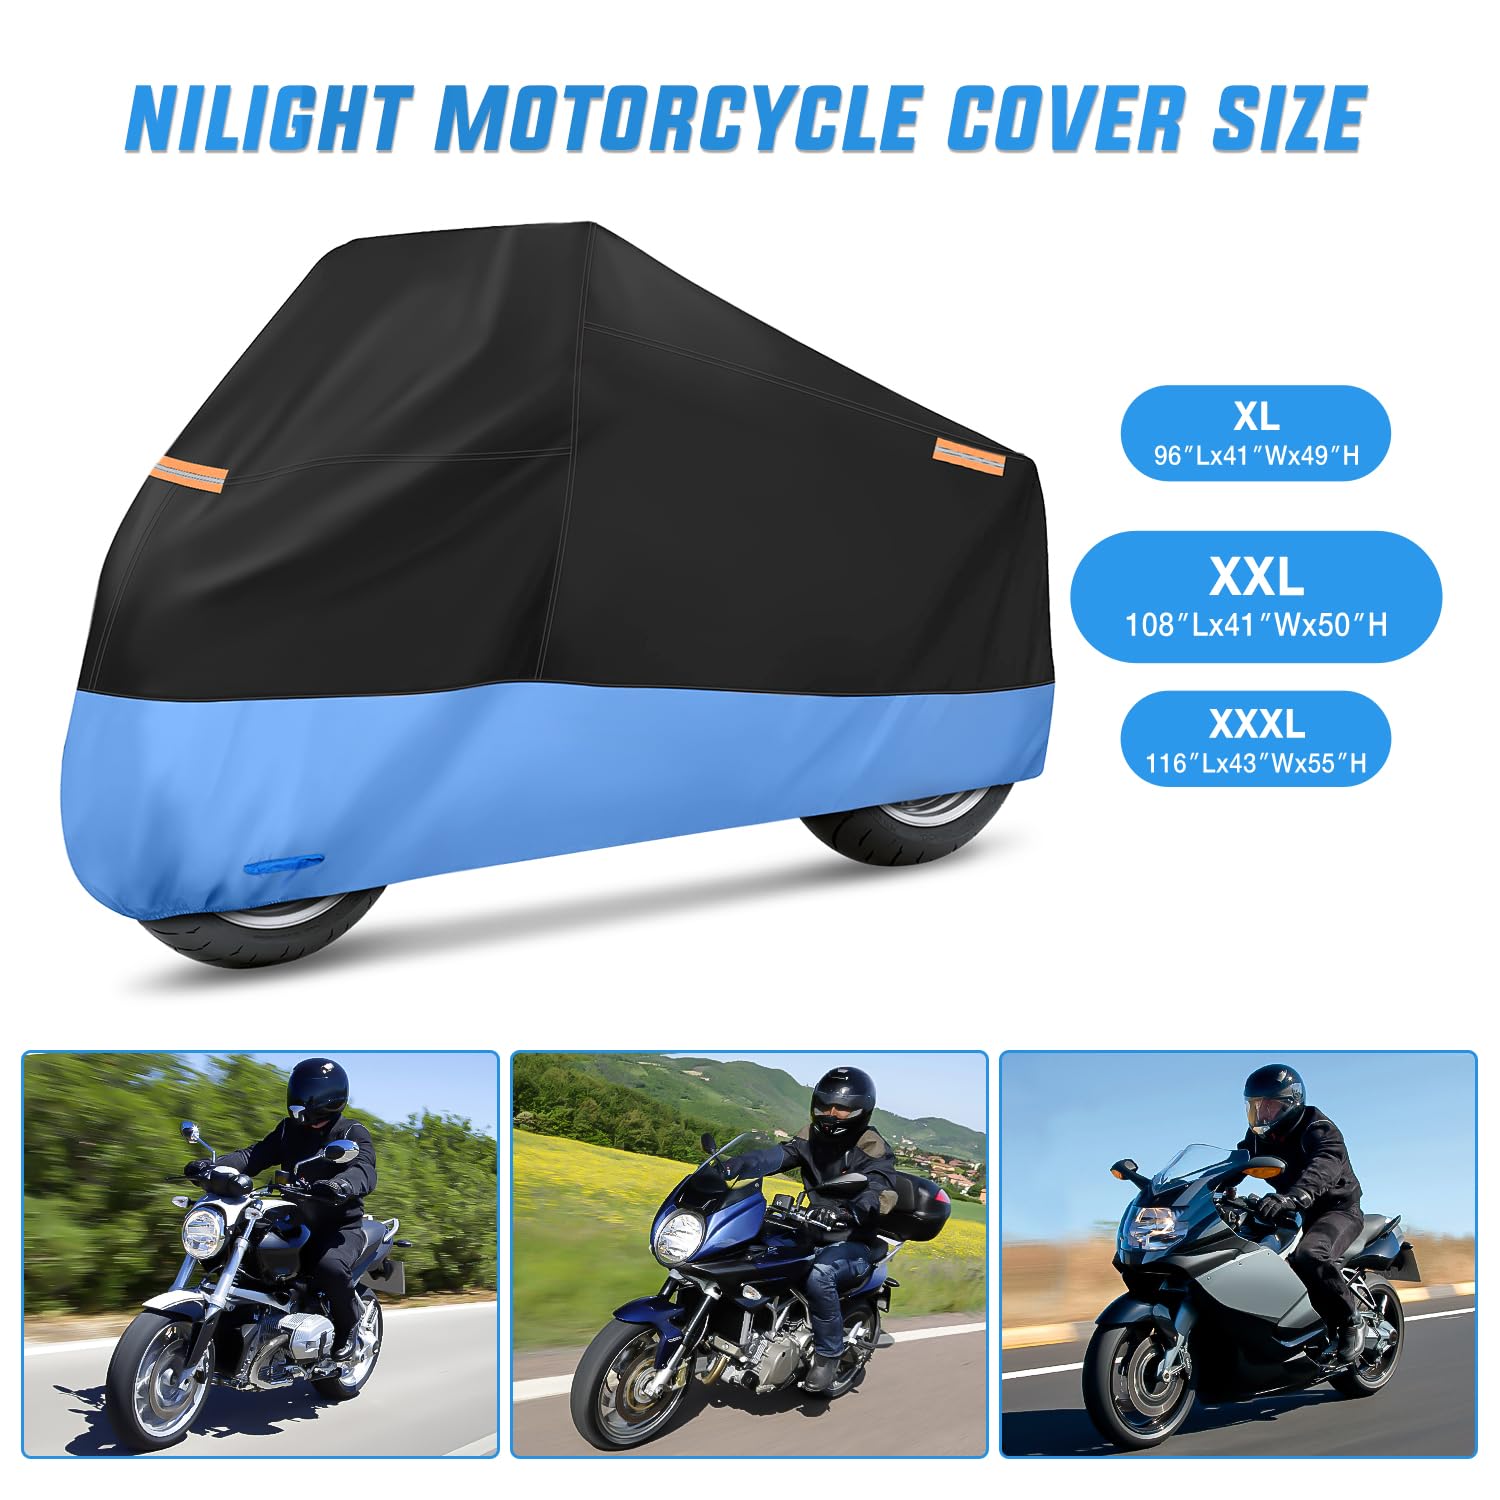 Nilight Motorcycle Cover All Season Universal Oxford Fabric with Lock-Hole Waterproof Durable UV with Storage Bag & Protective Reflective Strip Fits up to 108